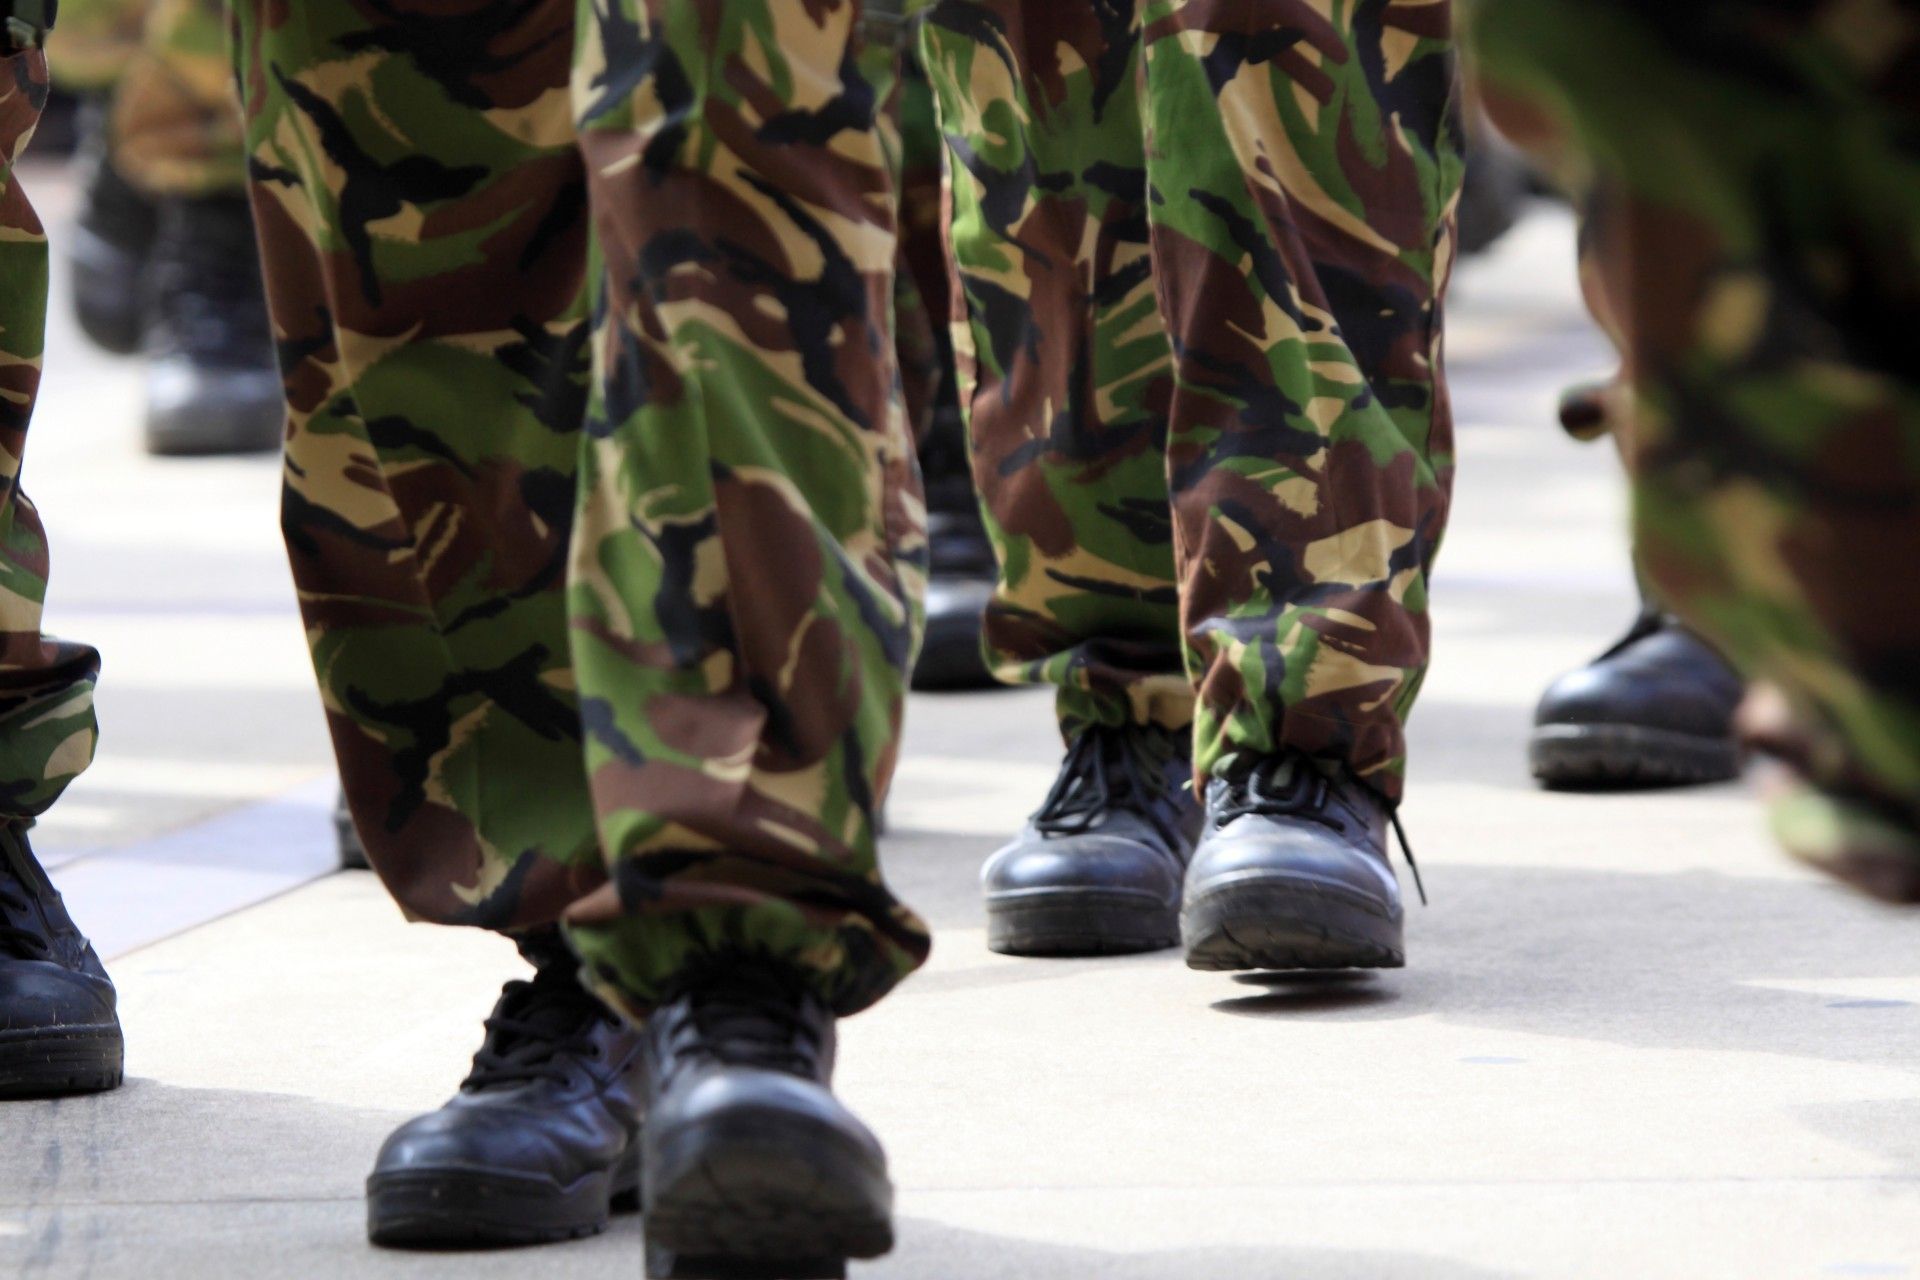 Closeup of legs marching while in BDUs and combat boots - military leave